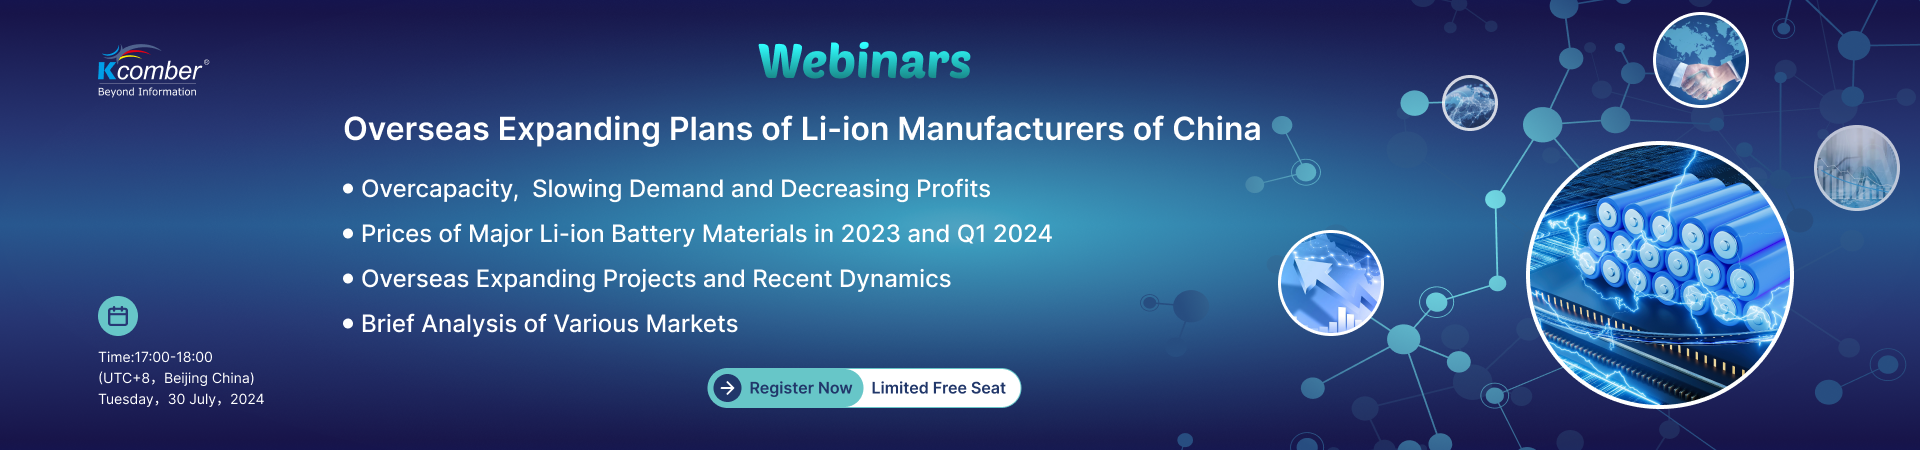 Overseas Expanding Plans of Li-ion Manufacturers of China